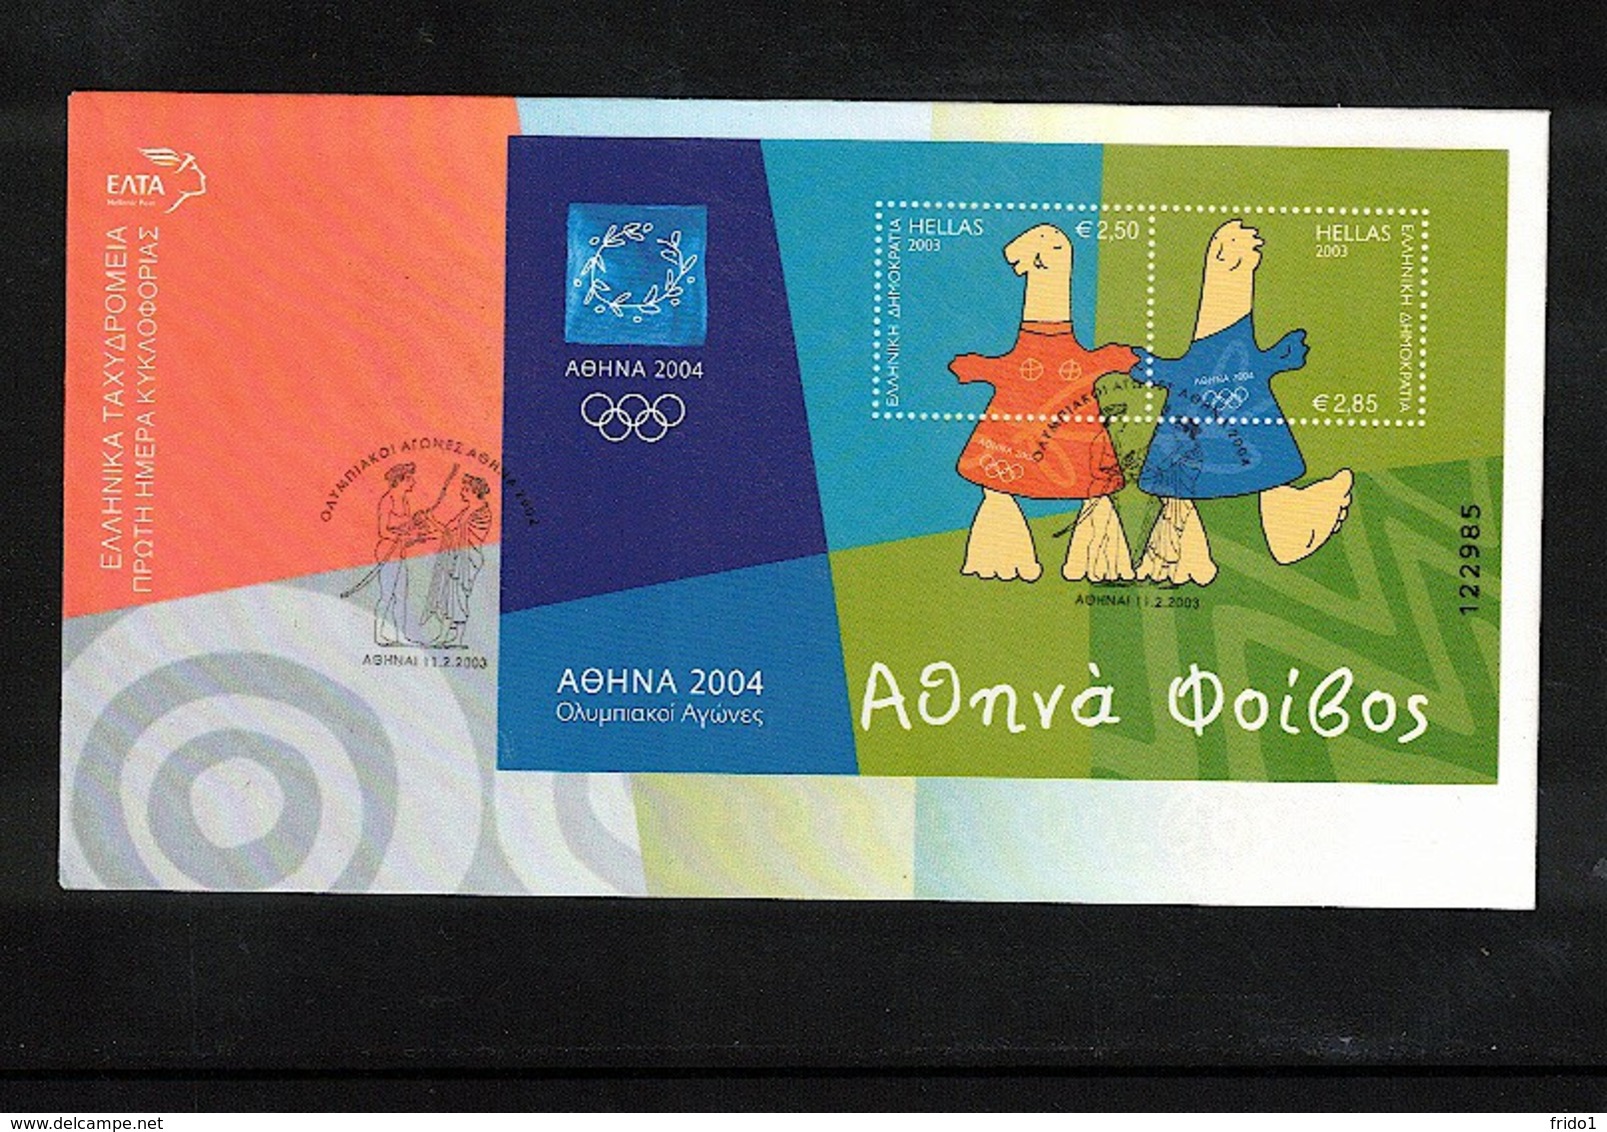 Greece / Griechenland 2003 Olympic Games Greece Block FDC - Sommer 2004: Athen